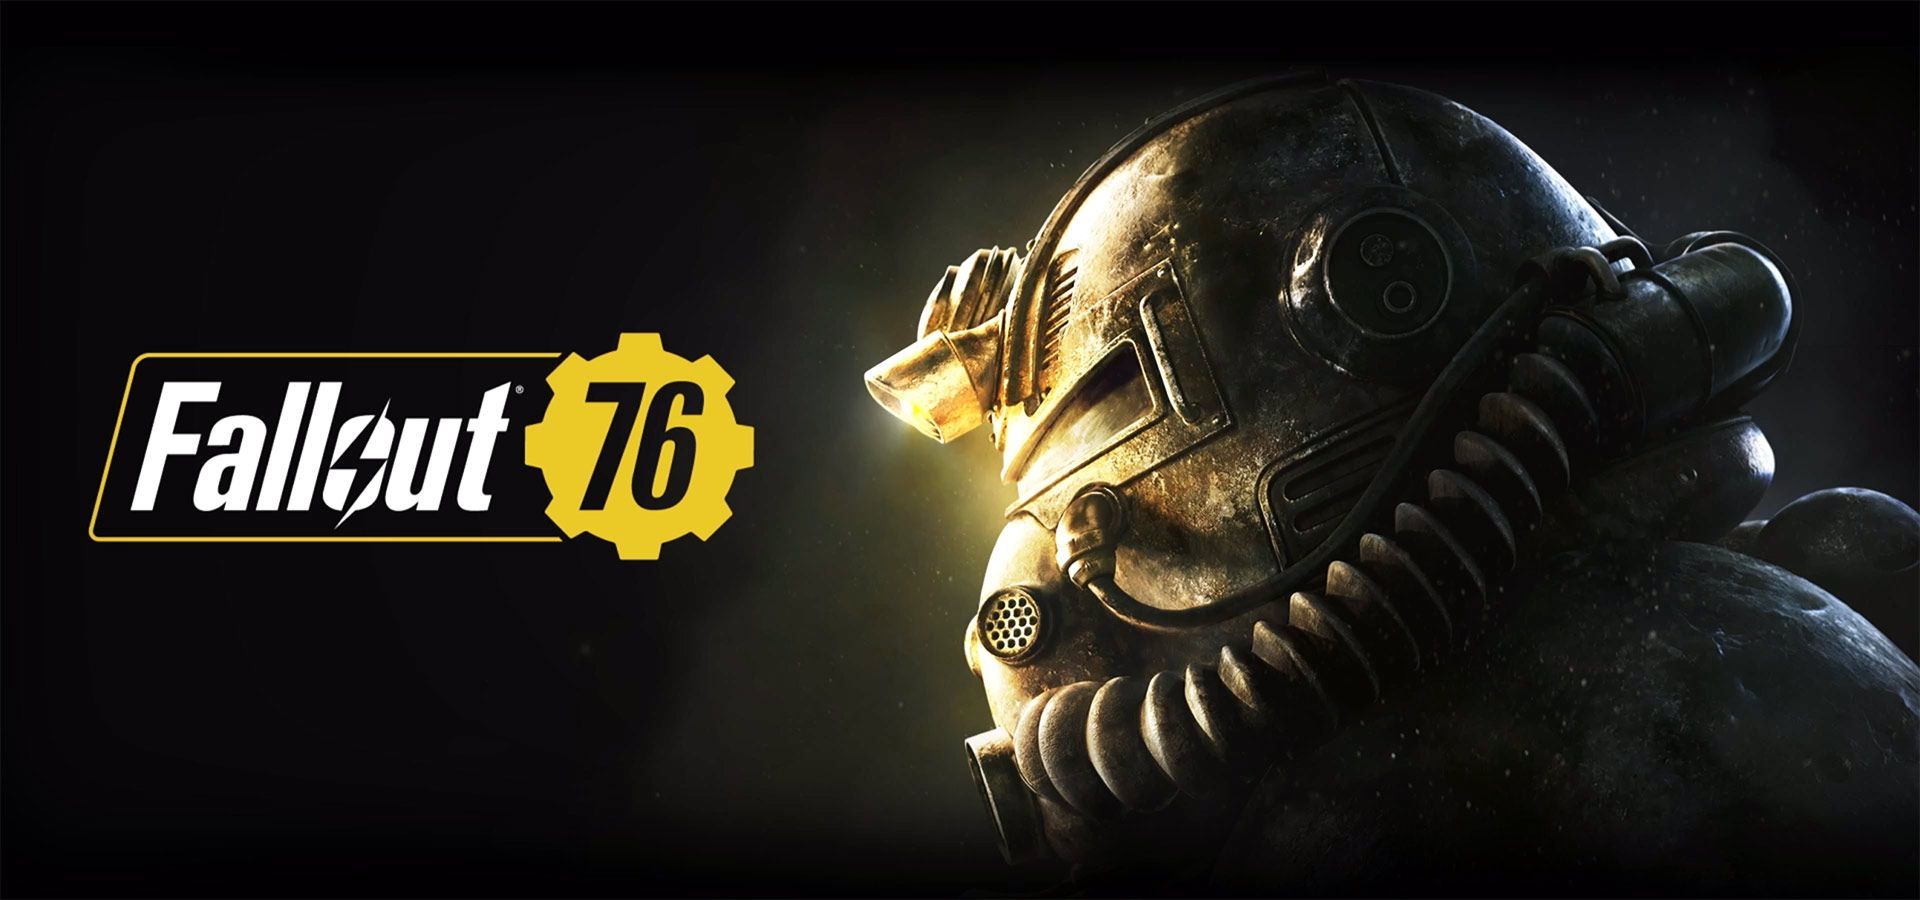 Fallout 76: Steel Reign - Official launch trailer